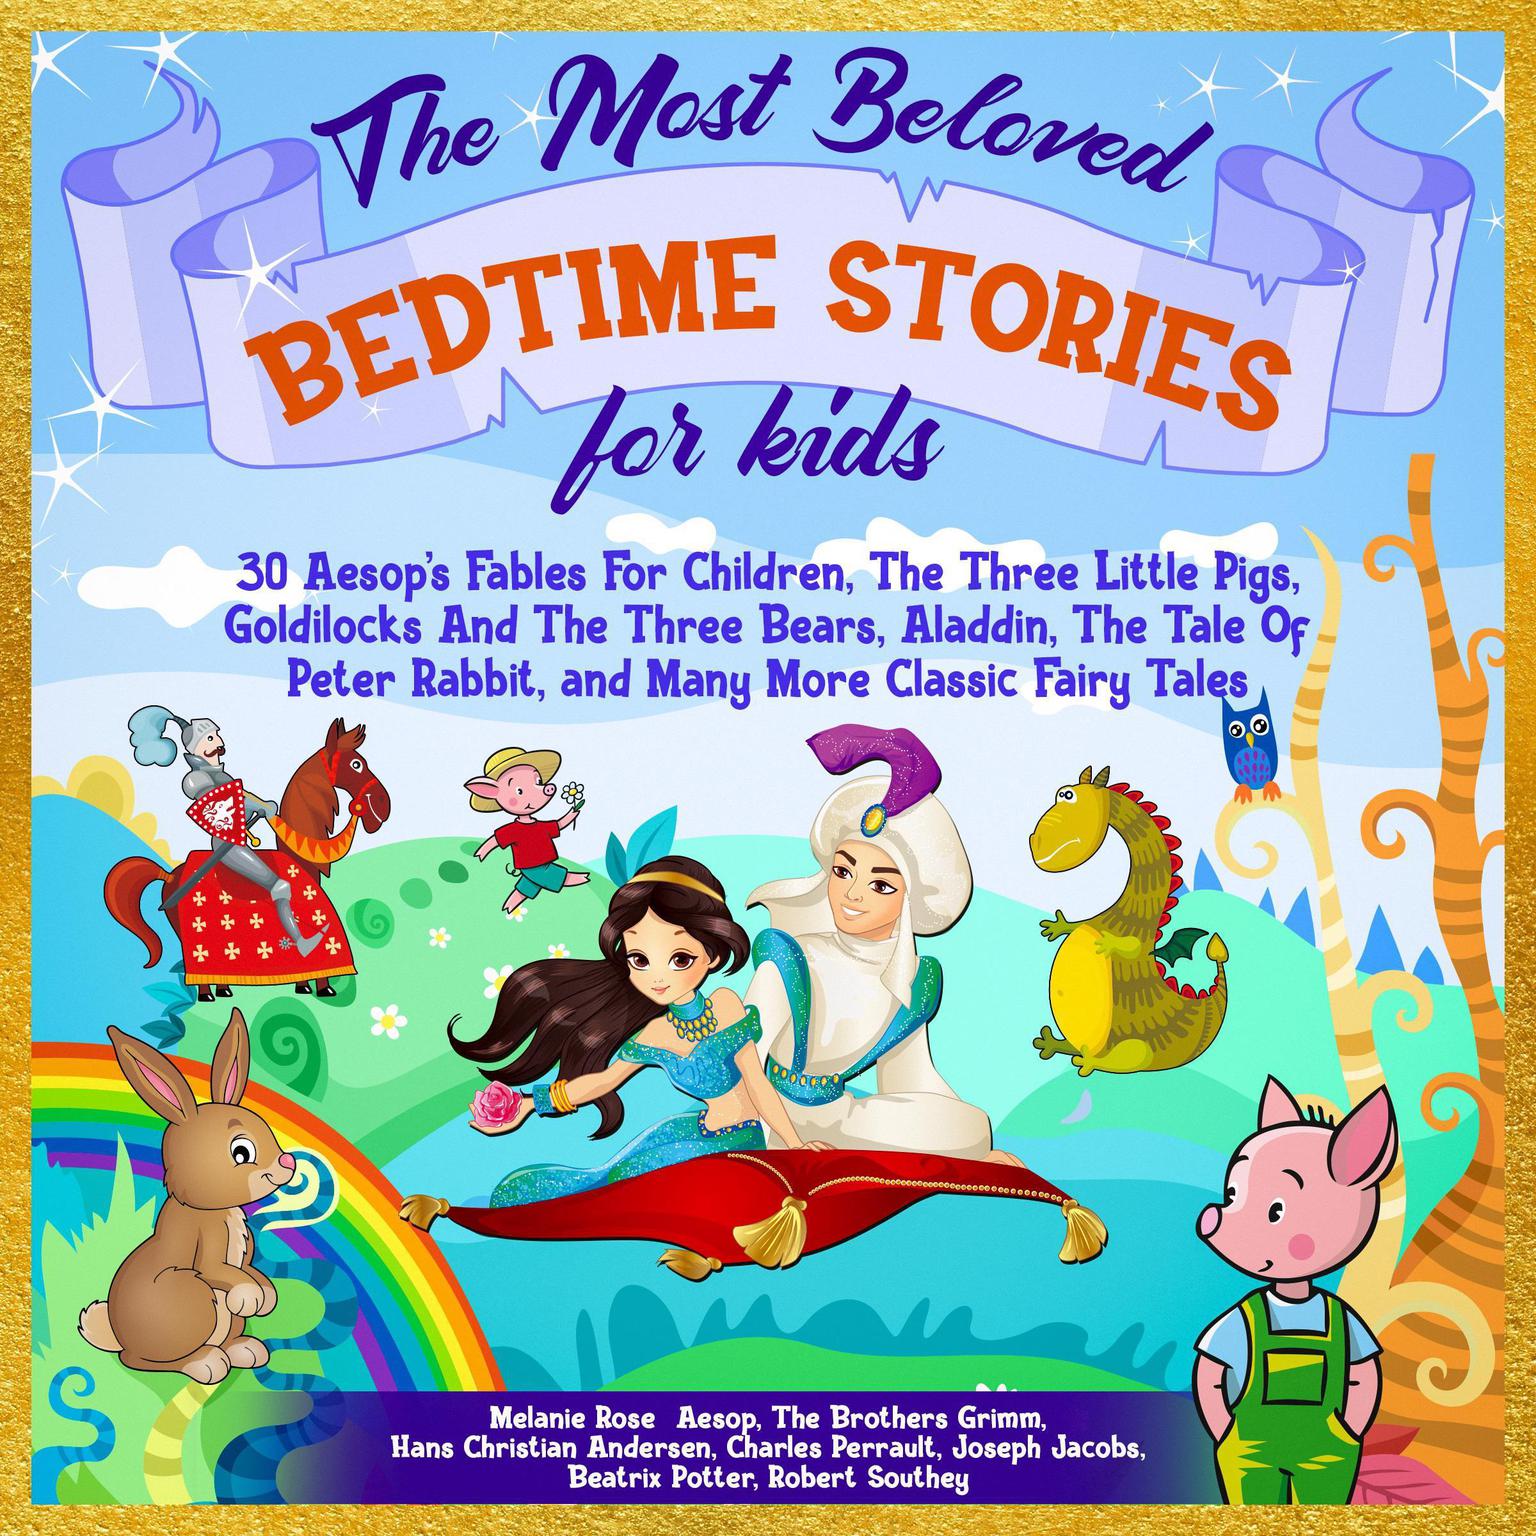 The Most Beloved Bedtime Stories For Kids: 30 Aesop’s Fables for Children, the Three Little Pigs, Goldilocks and the Three Bears, Aladdin, the Tale of Peter Rabbit, and Many More Classic Fairy Tales Audiobook, by Hans Christian Andersen